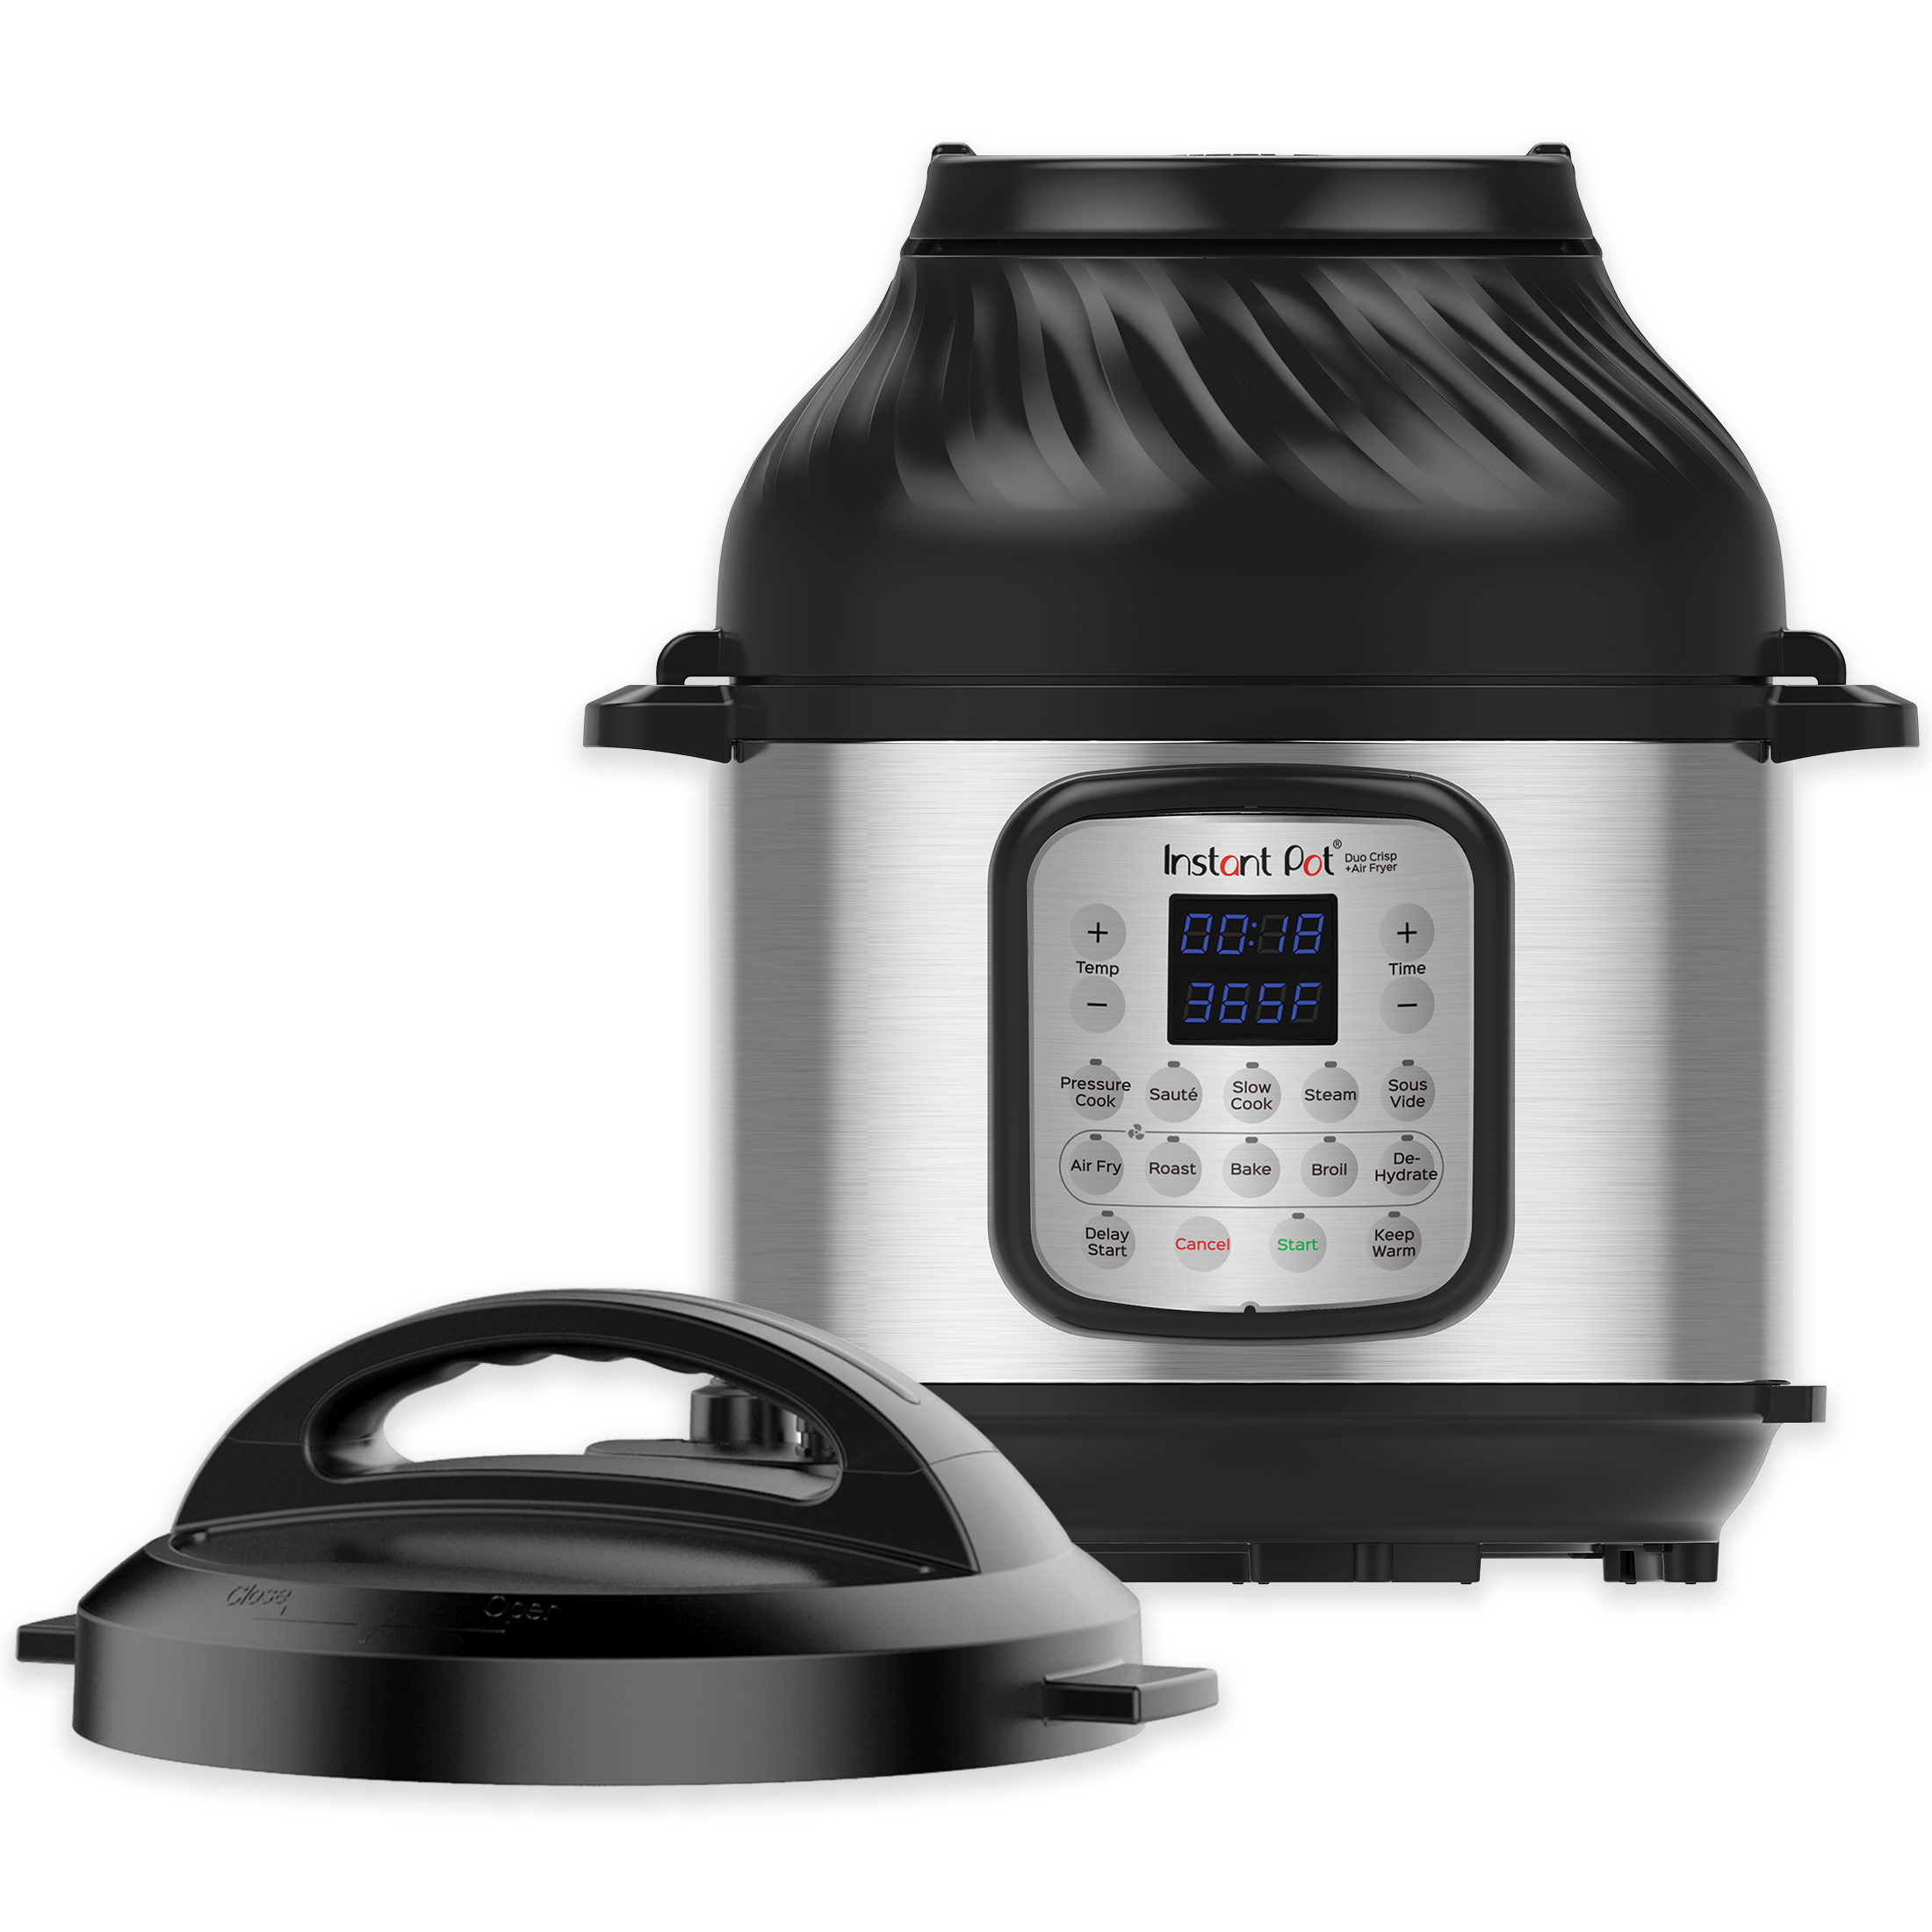 Starts Nov 22: Instant Pot Duo Crisp 11-in-1 Electric Pressure Cooker with Air Fryer Lid, 8 Quart Stainless Steel/Black, $99 at Walmart